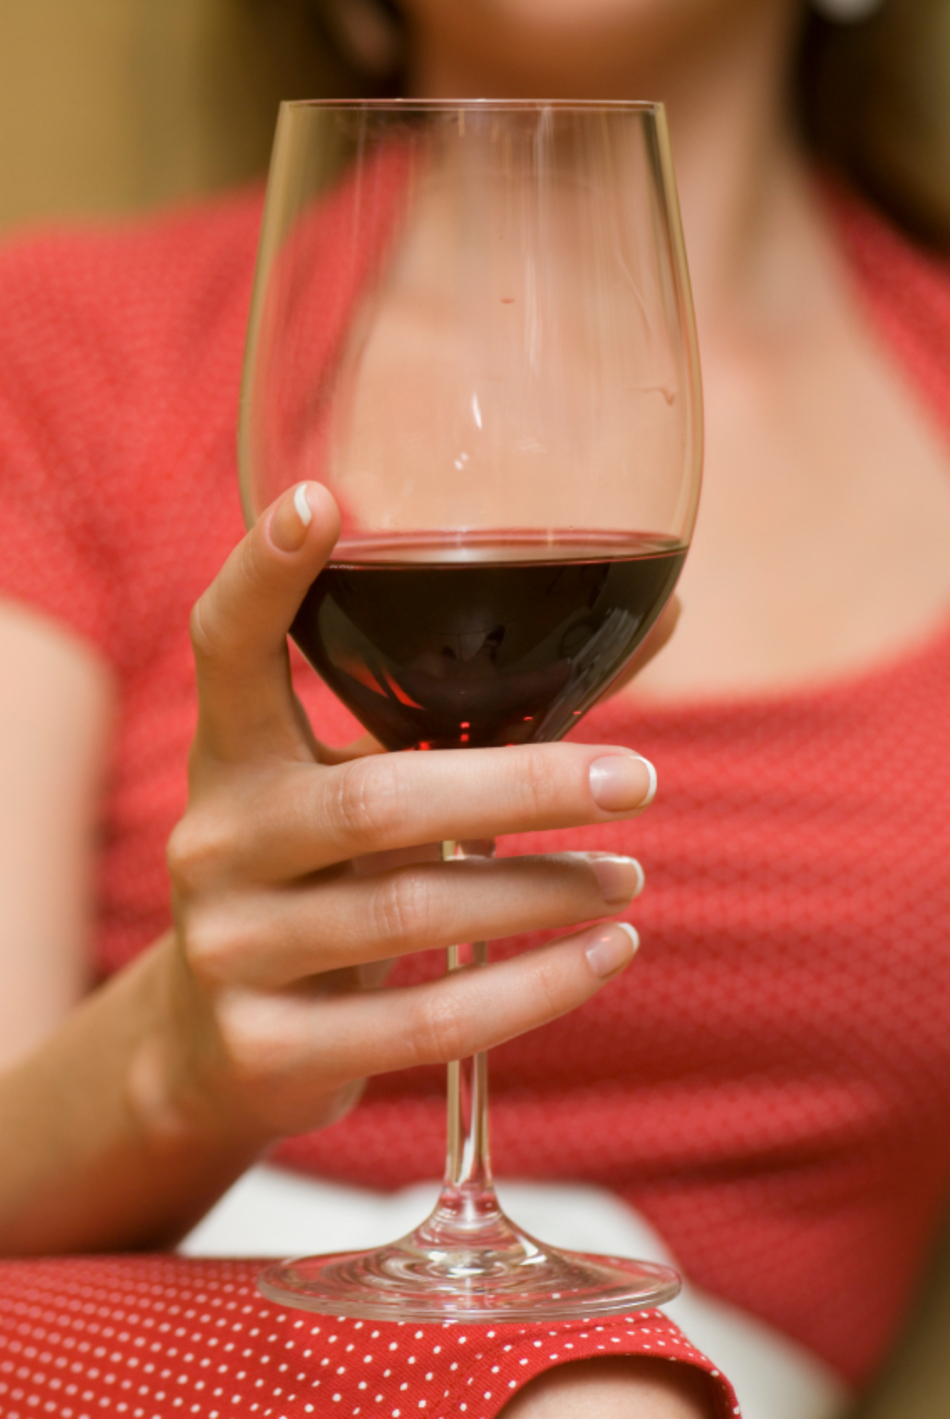 Think Before You Drink: Alcohol Affects Men & Women Differently